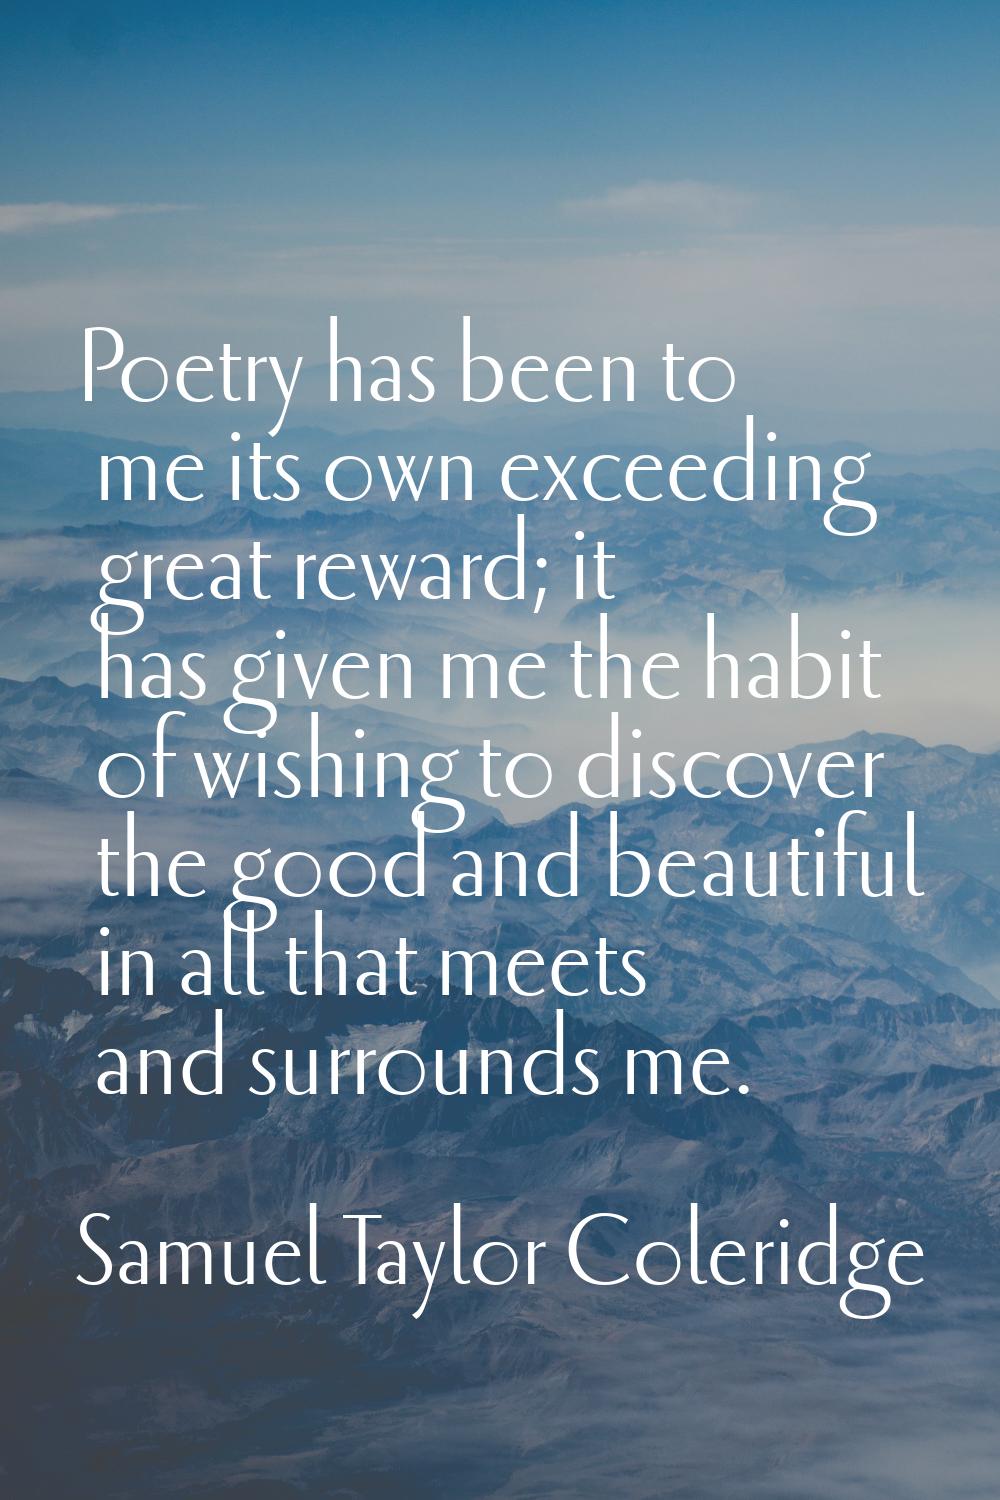 Poetry has been to me its own exceeding great reward; it has given me the habit of wishing to disco